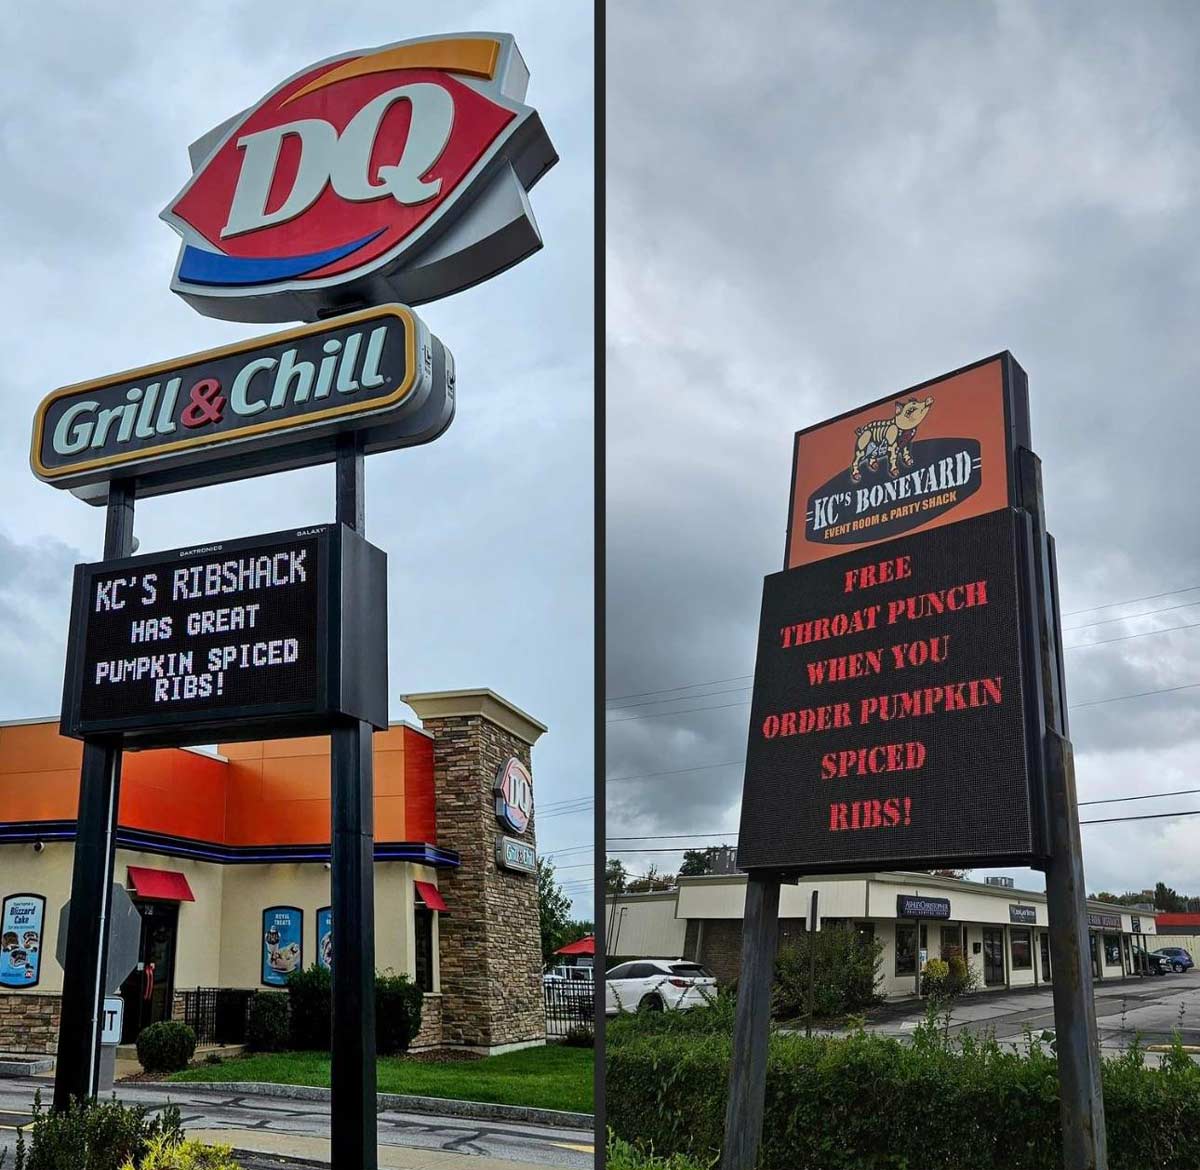 Two businesses. Two different senses of humor